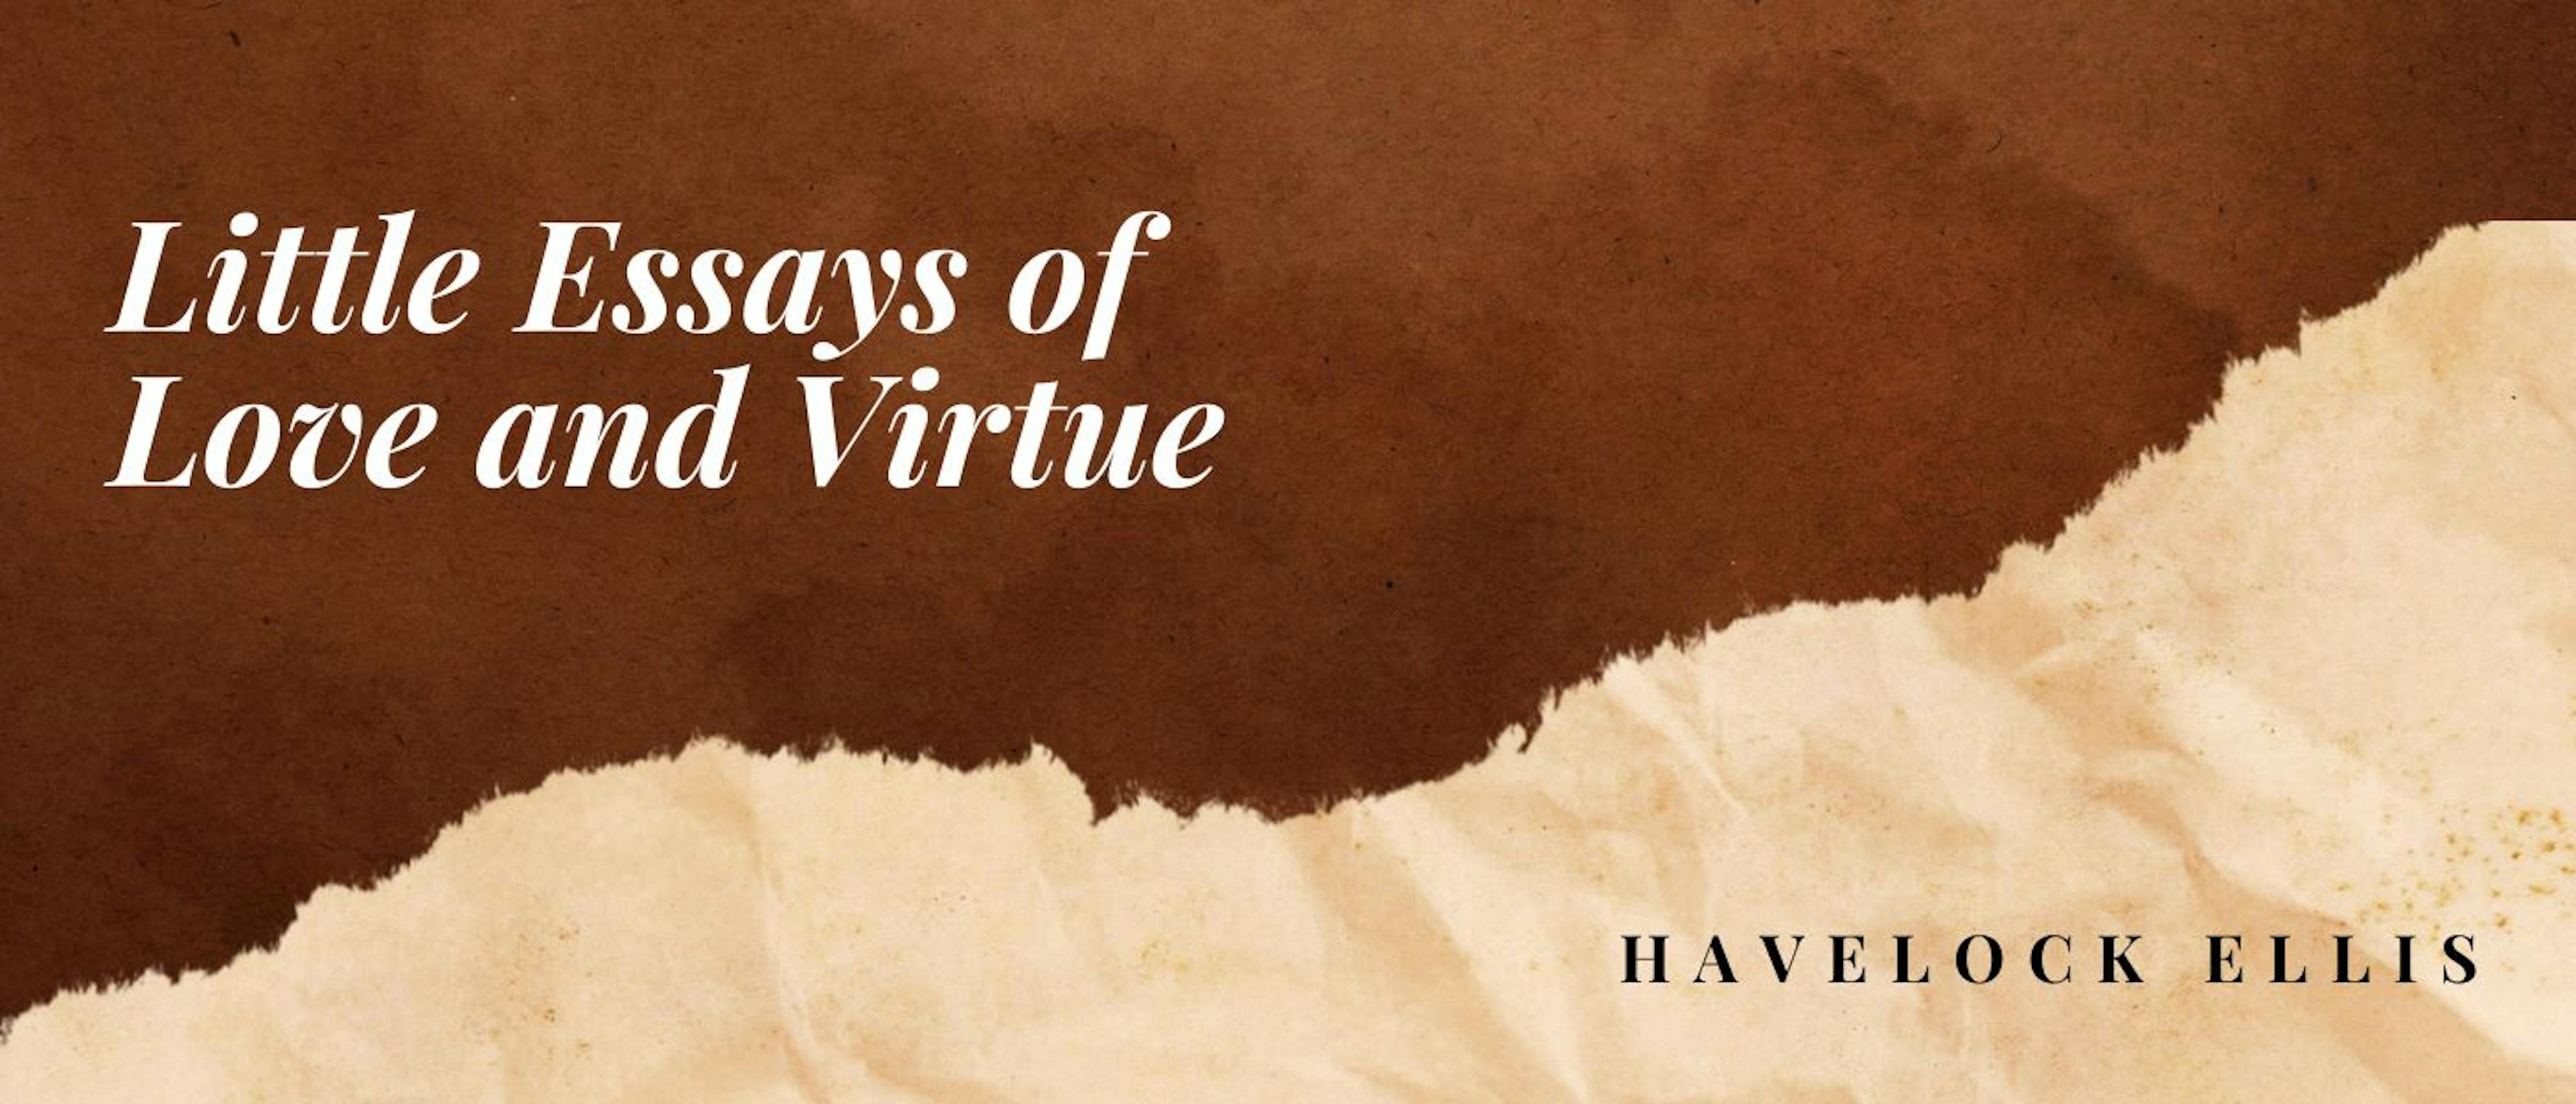 featured image - Little Essays of Love and Virtue by Havelock Ellis - Table of Links